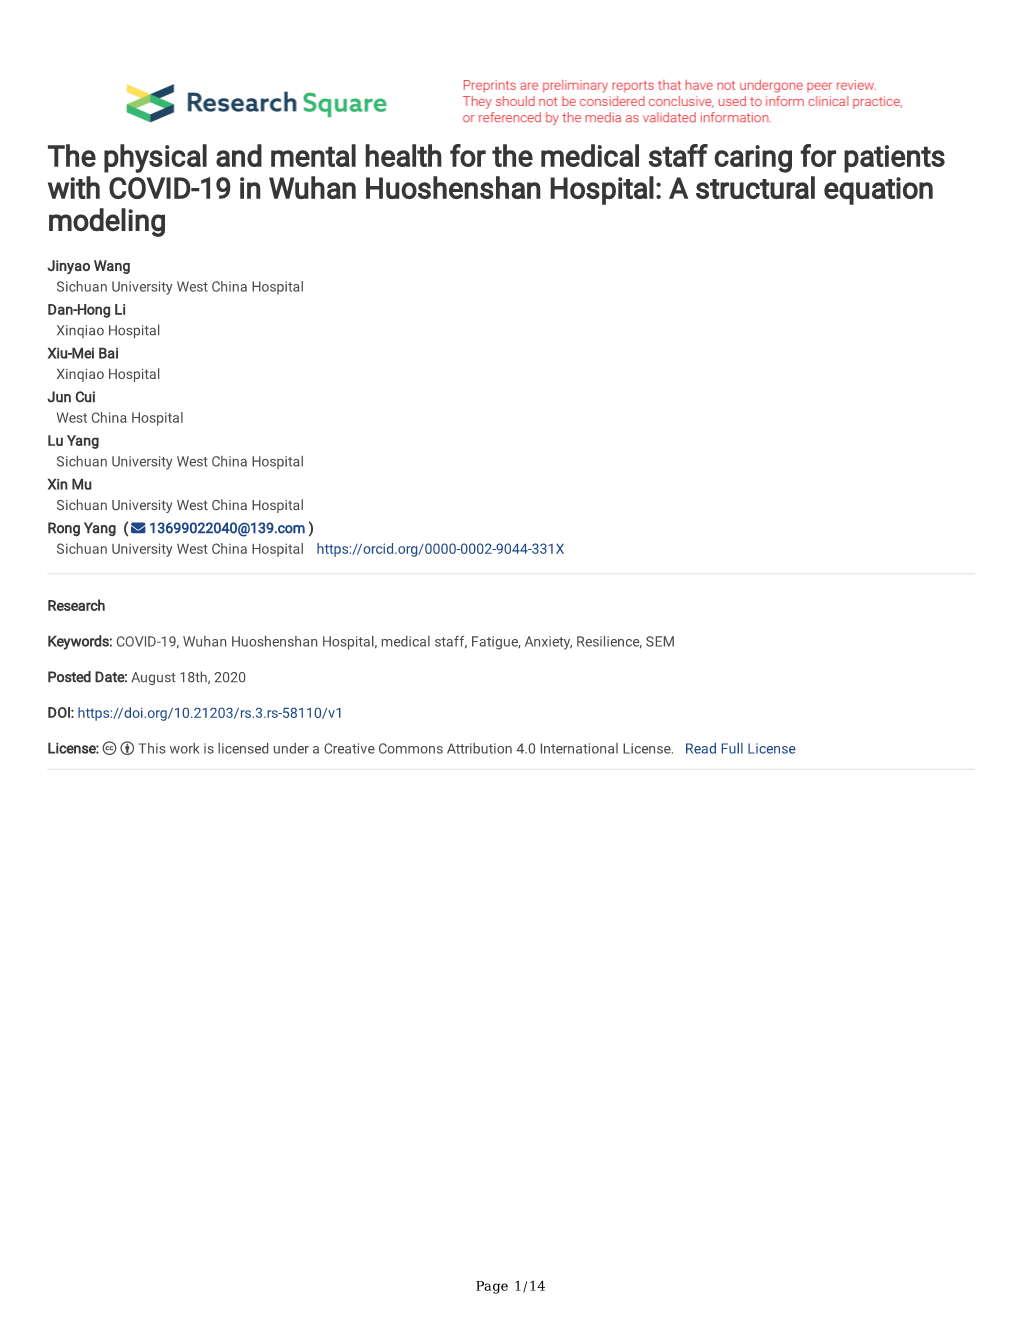 The Physical and Mental Health for the Medical Staff Caring for Patients with COVID-19 in Wuhan Huoshenshan Hospital: a Structural Equation Modeling